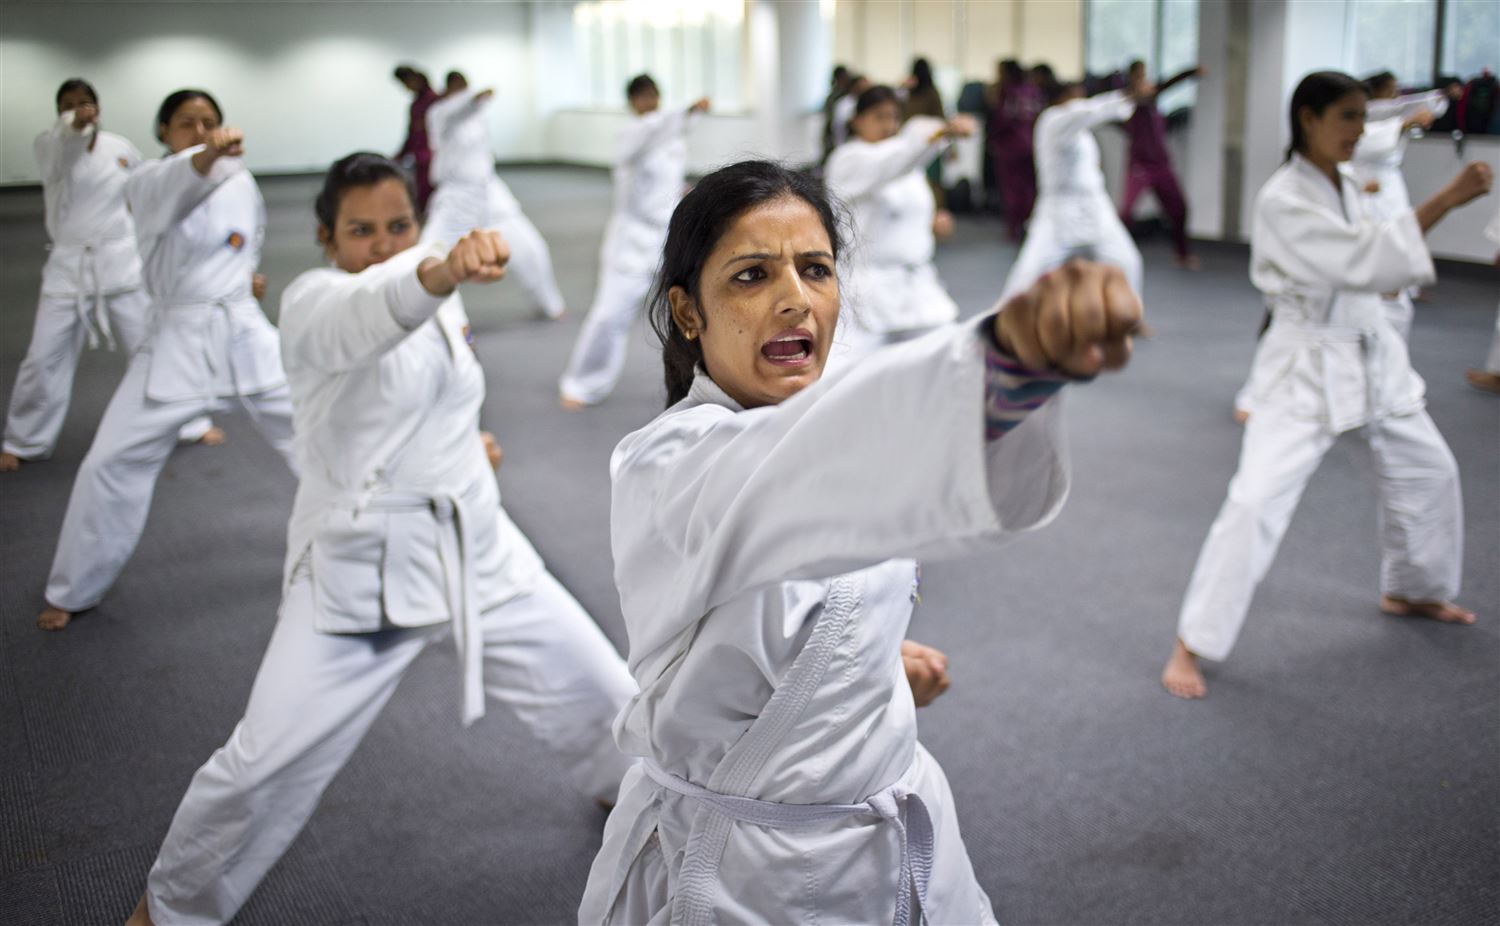 Maharashtra Govt Plans To Introduce Self Defence In School Curriculums